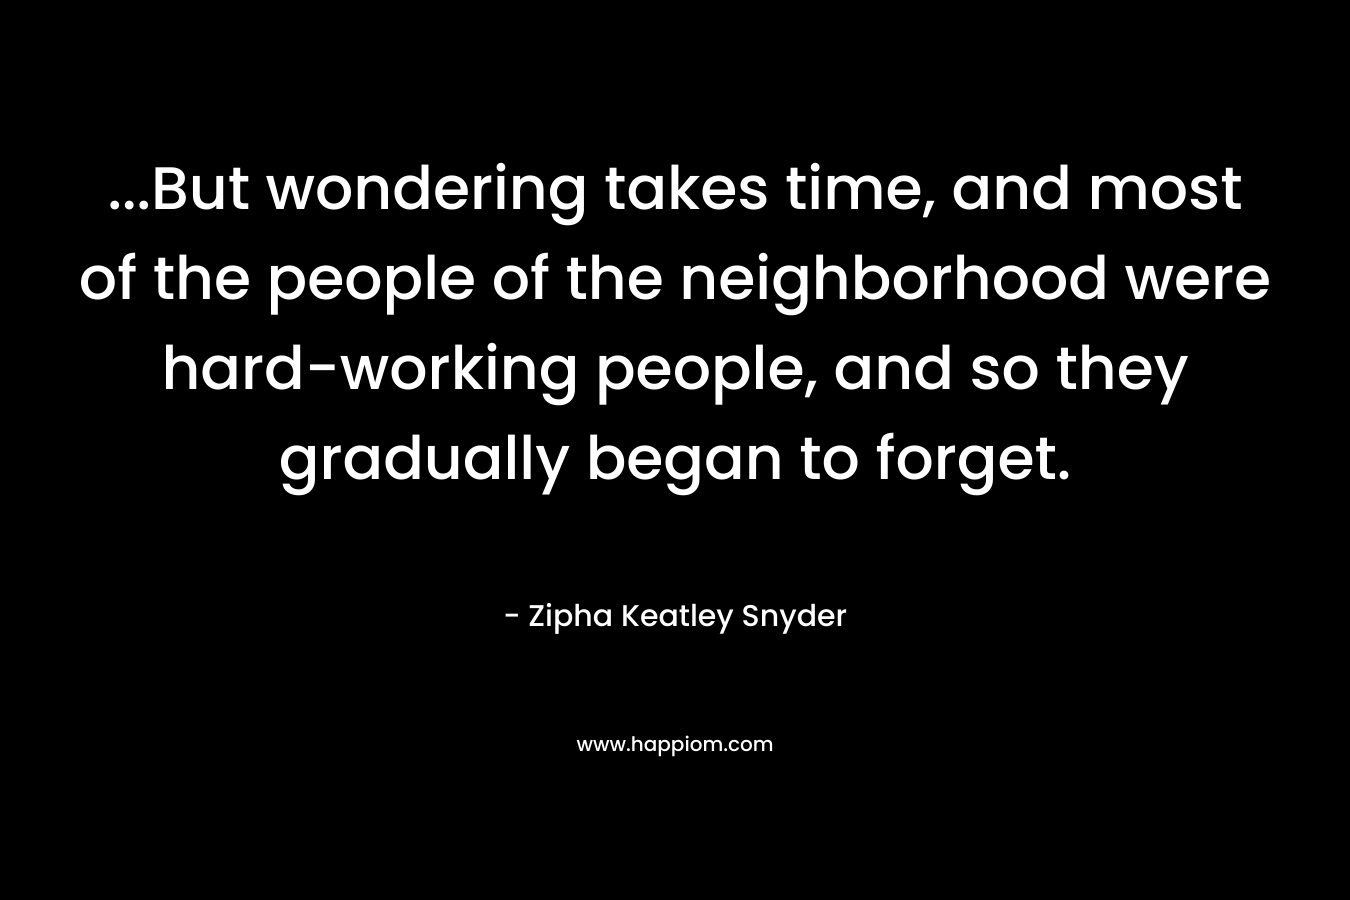 …But wondering takes time, and most of the people of the neighborhood were hard-working people, and so they gradually began to forget. – Zipha Keatley Snyder